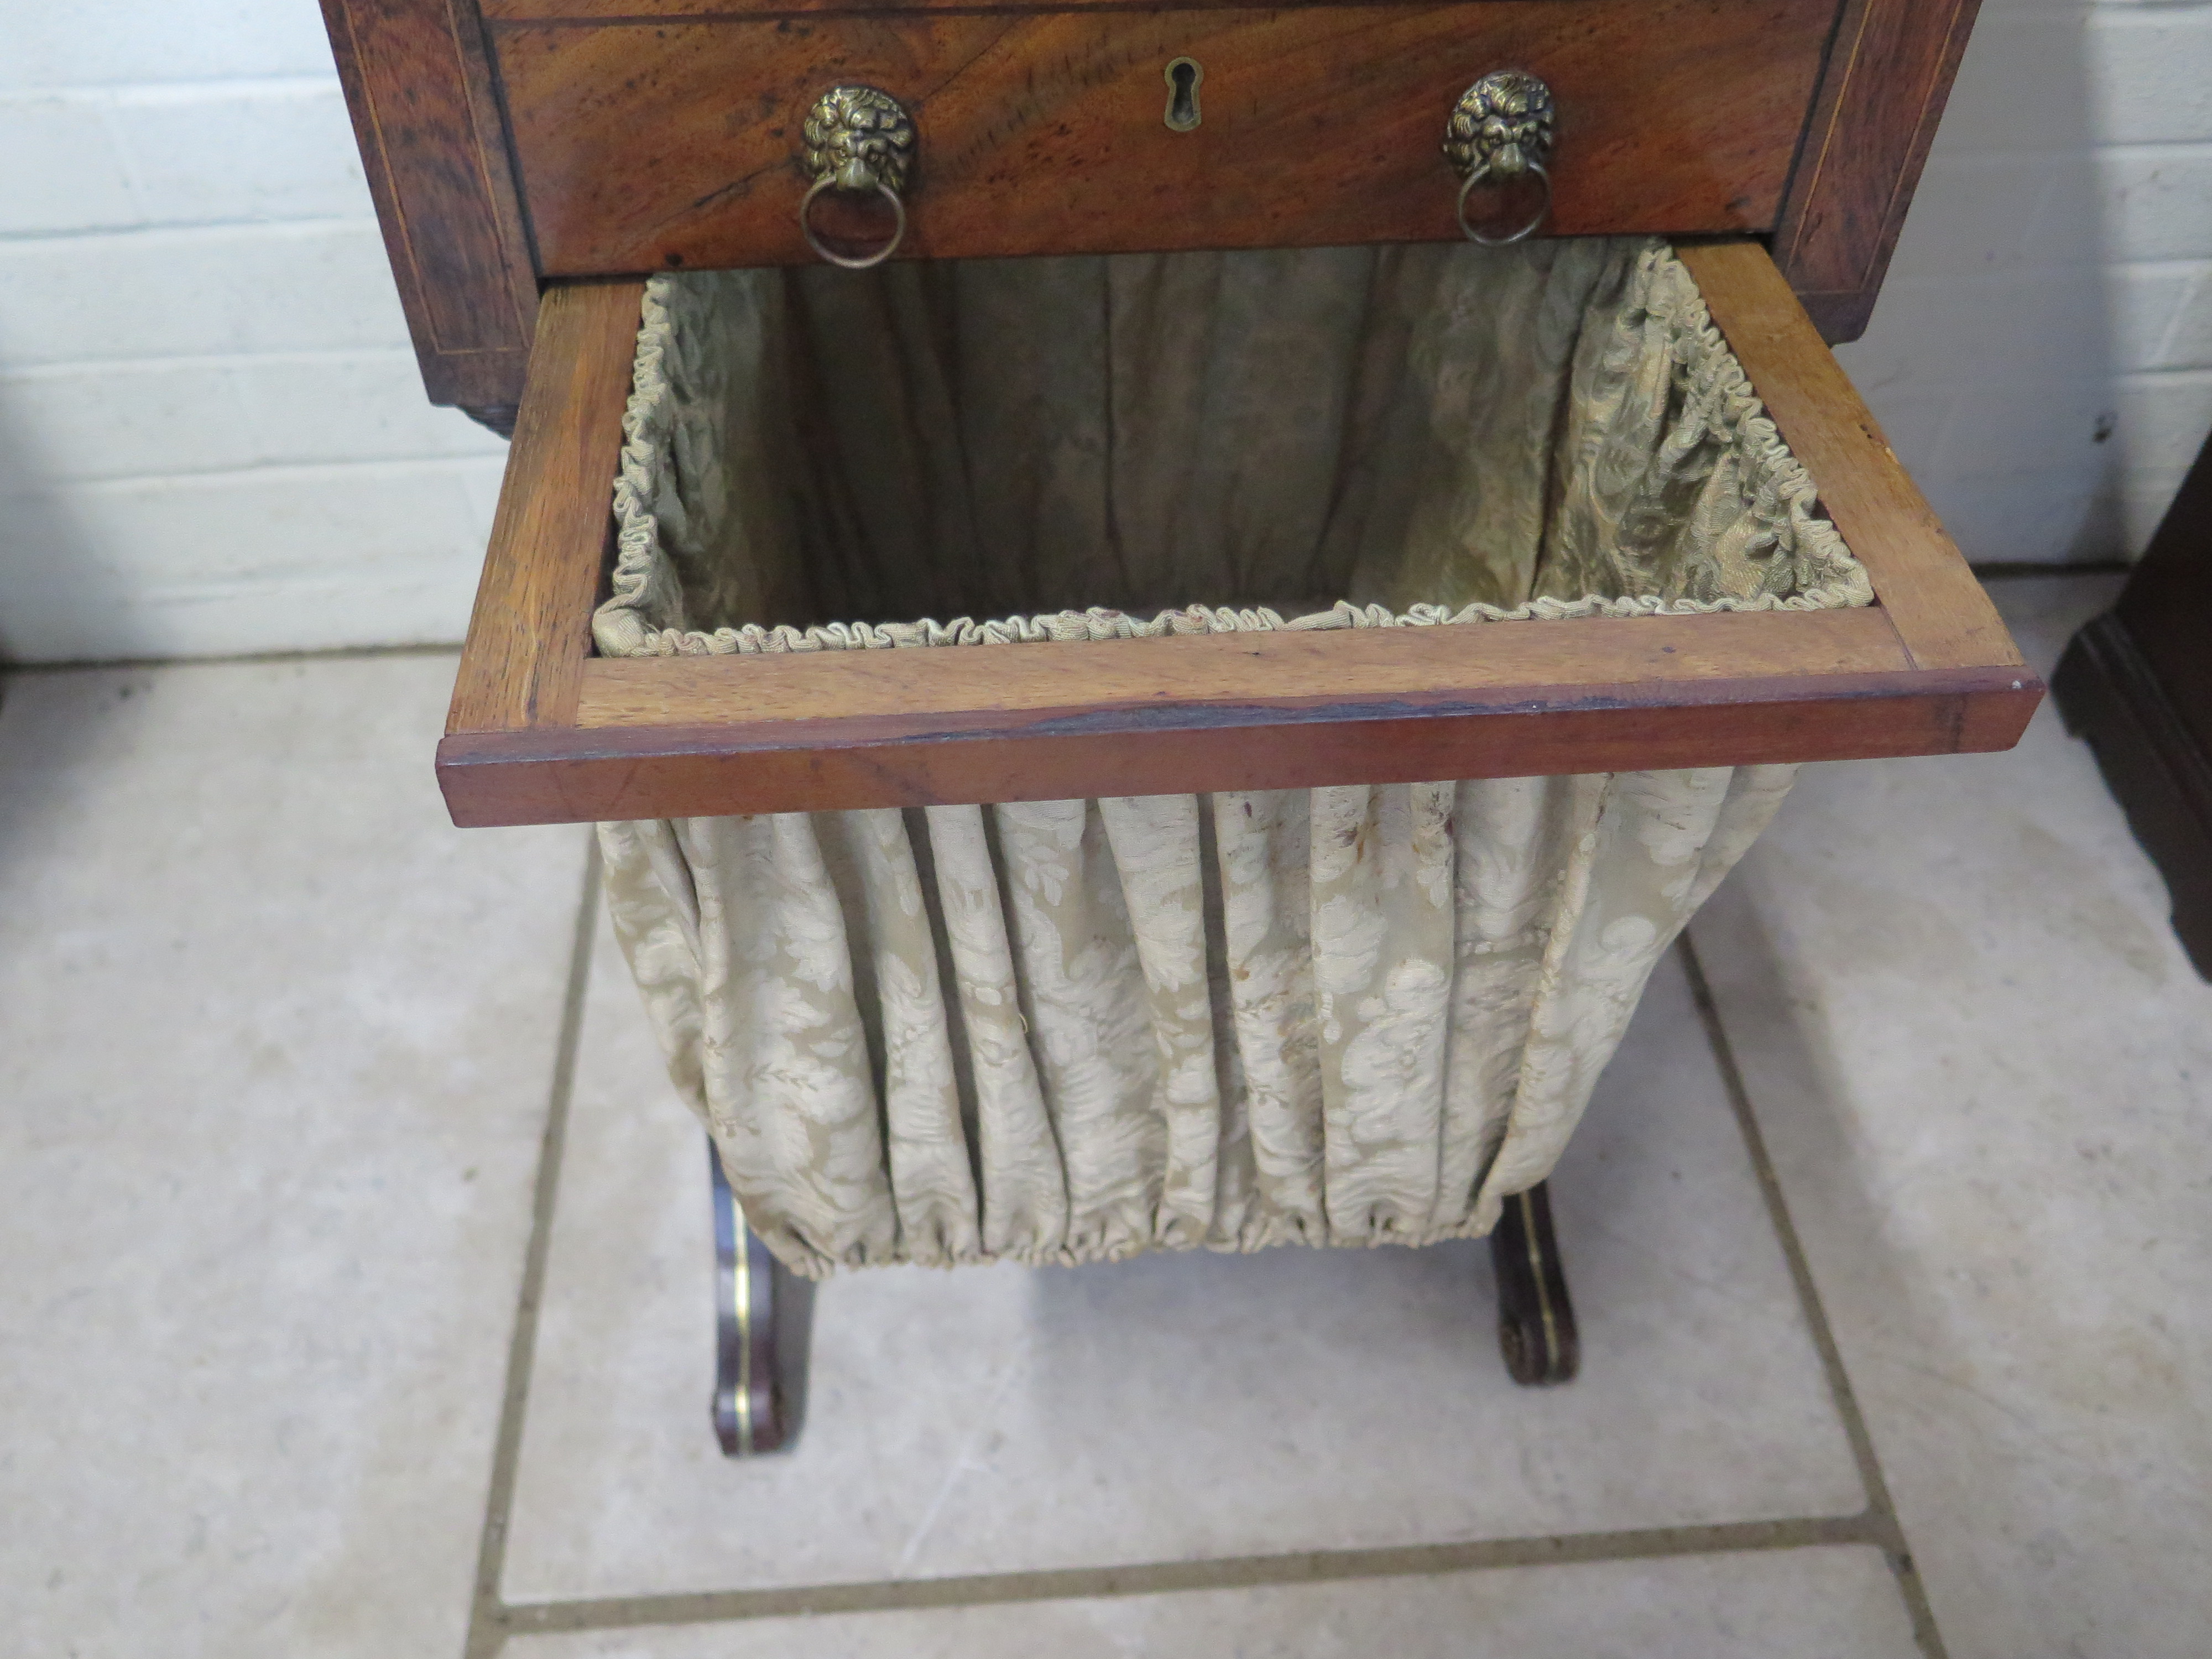 A 19th century mahogany and cross banded work box, with drop flaps, two drawers and a pull out - Image 2 of 3